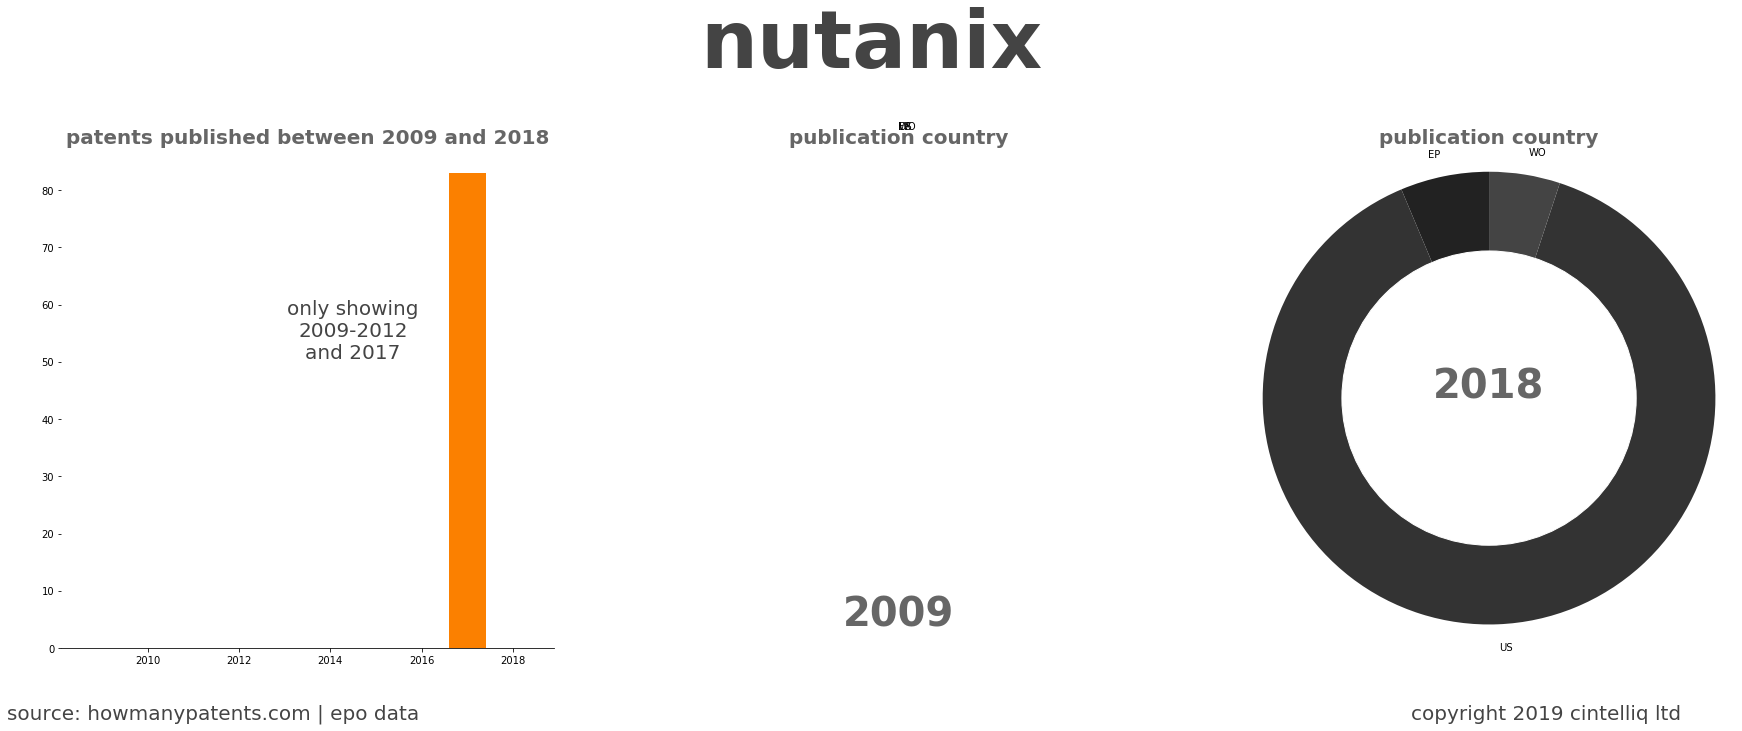 summary of patents for Nutanix